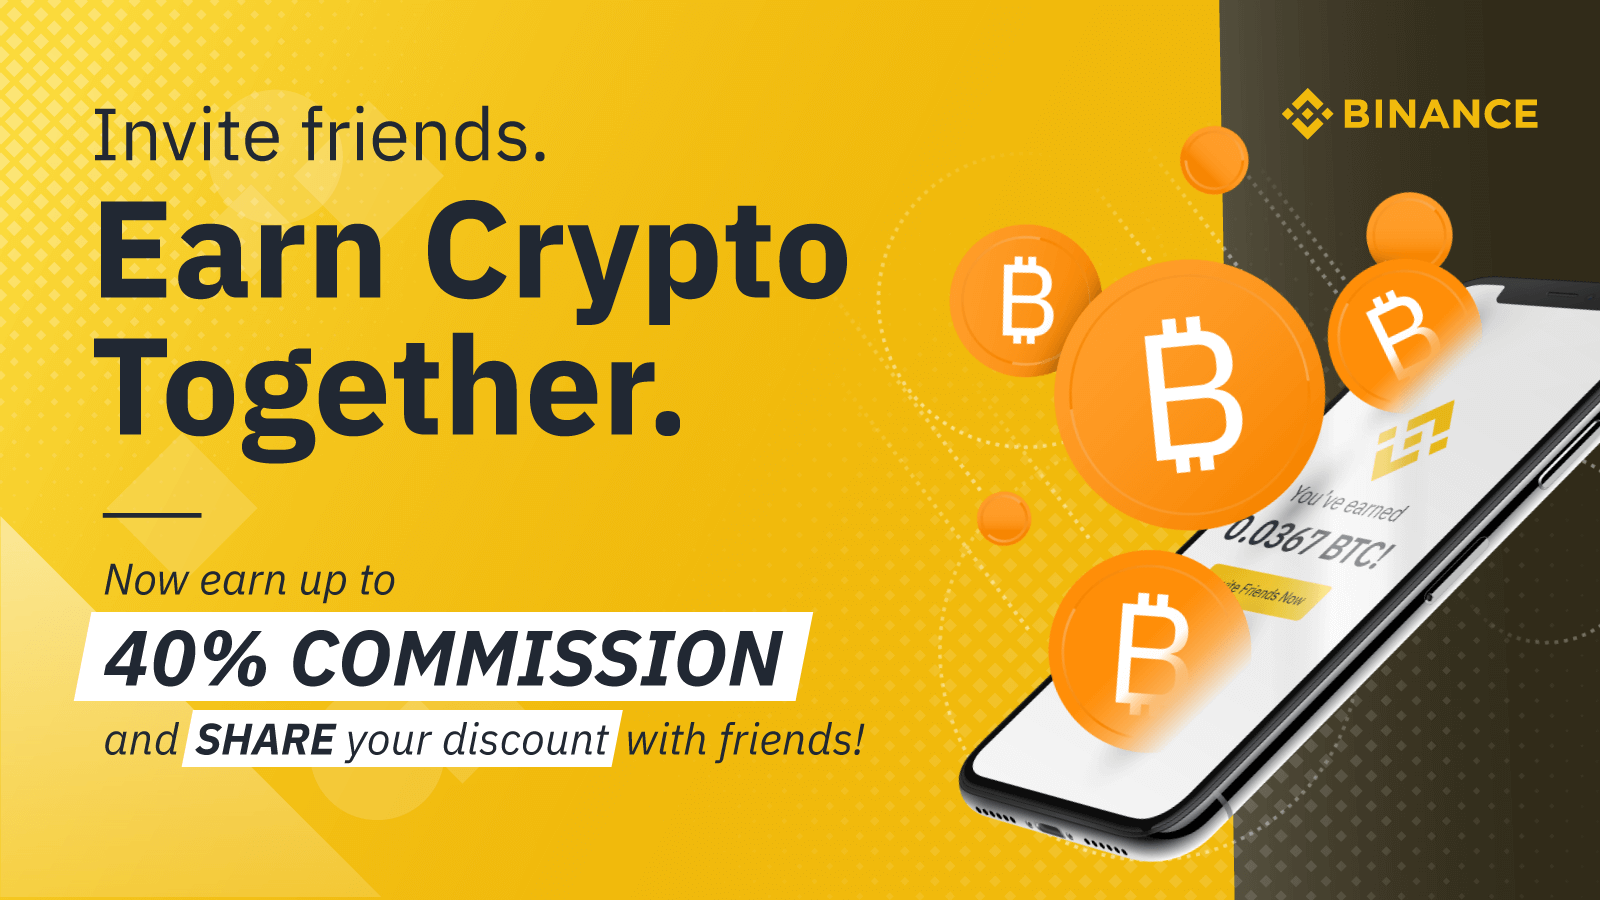 Binance Referral Program Promotion - Up to 40% Referral Rate